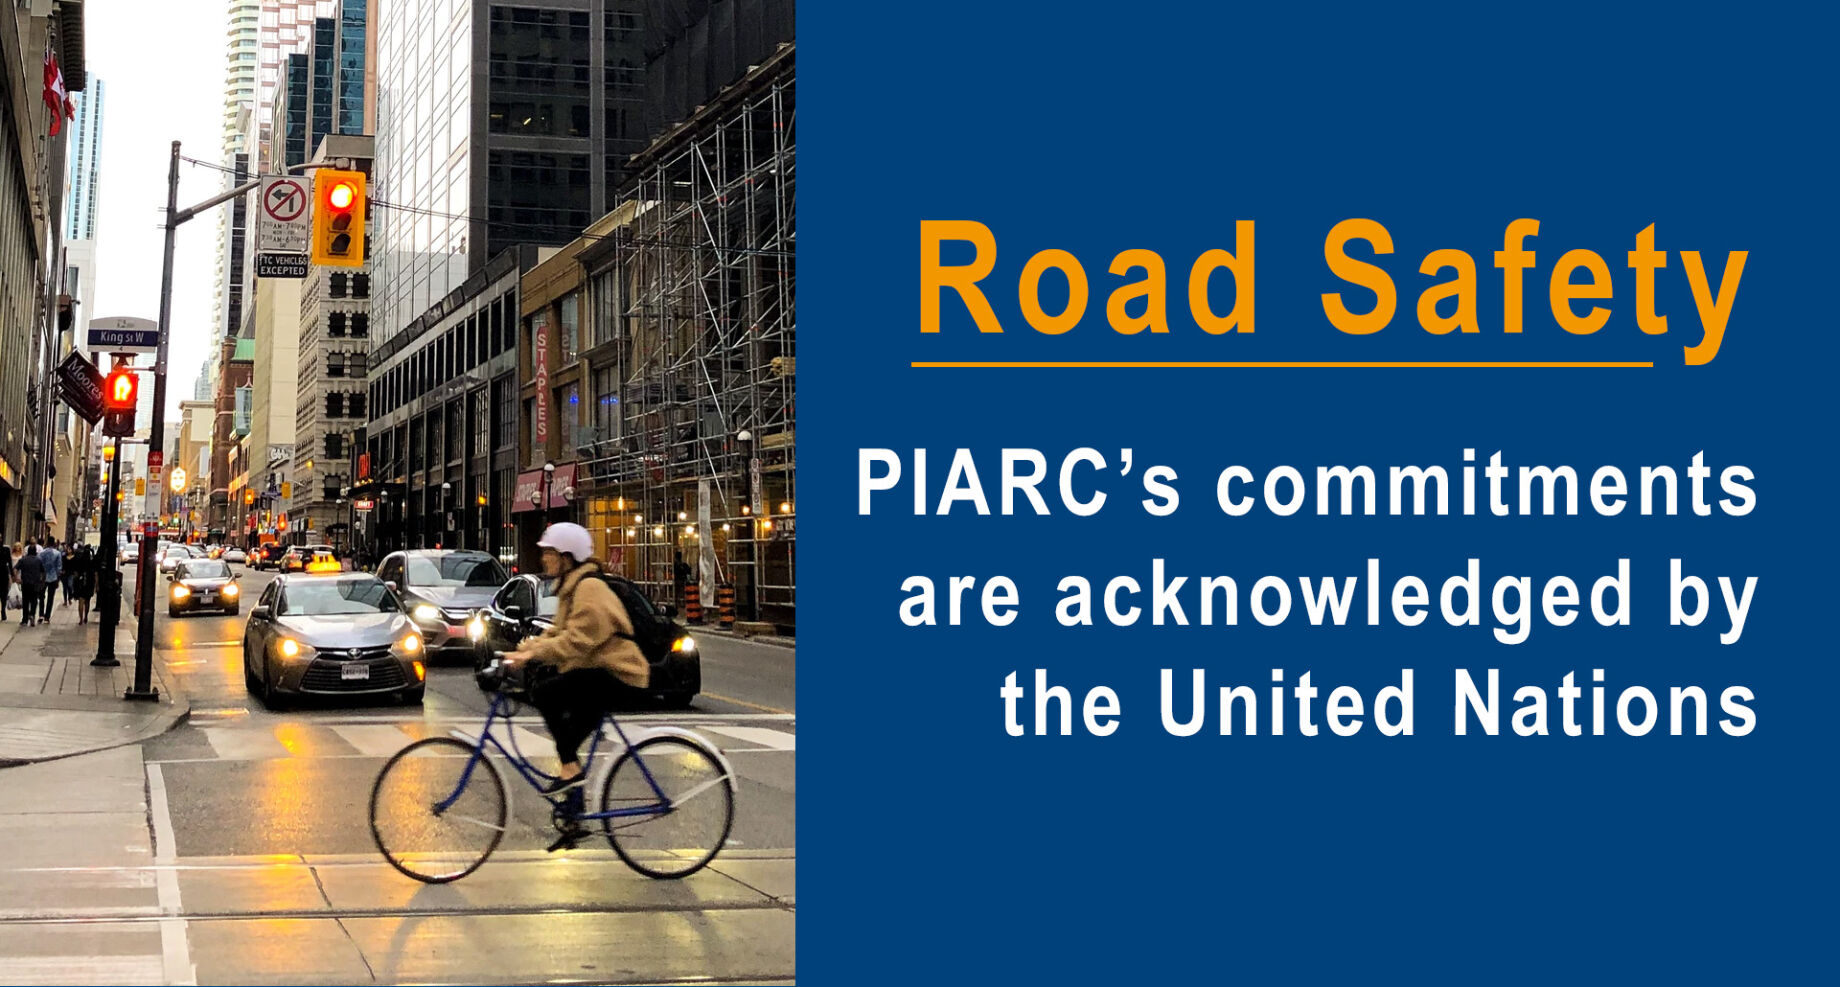 Road Safety - PIARC’s commitments are acknowledged by the United Nations